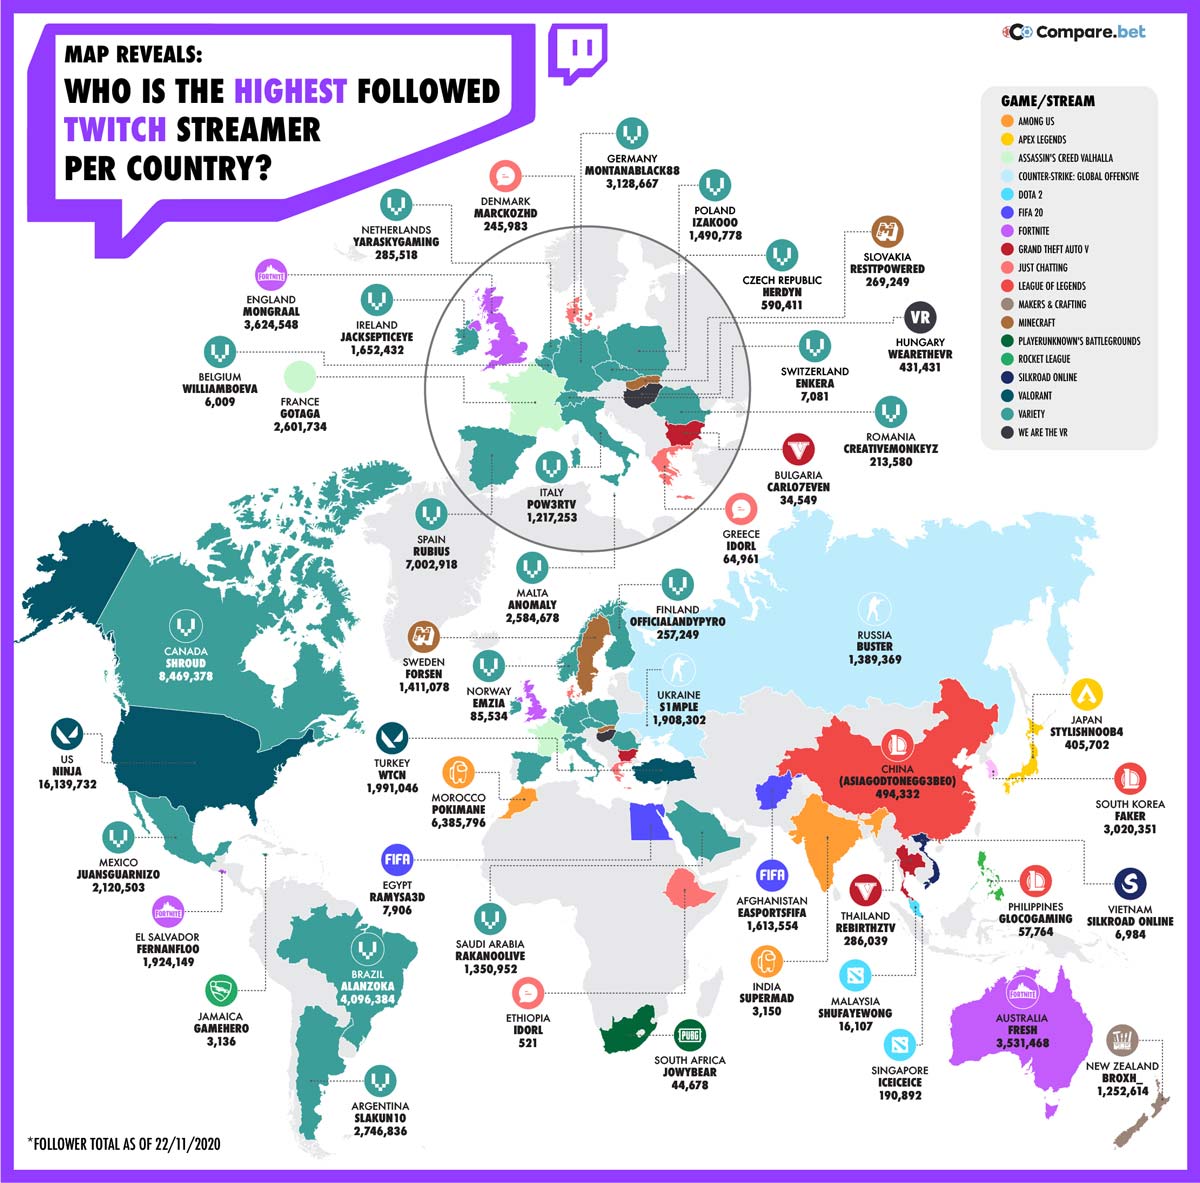 Here are the top Twitch streamers per country and how much they earn per video